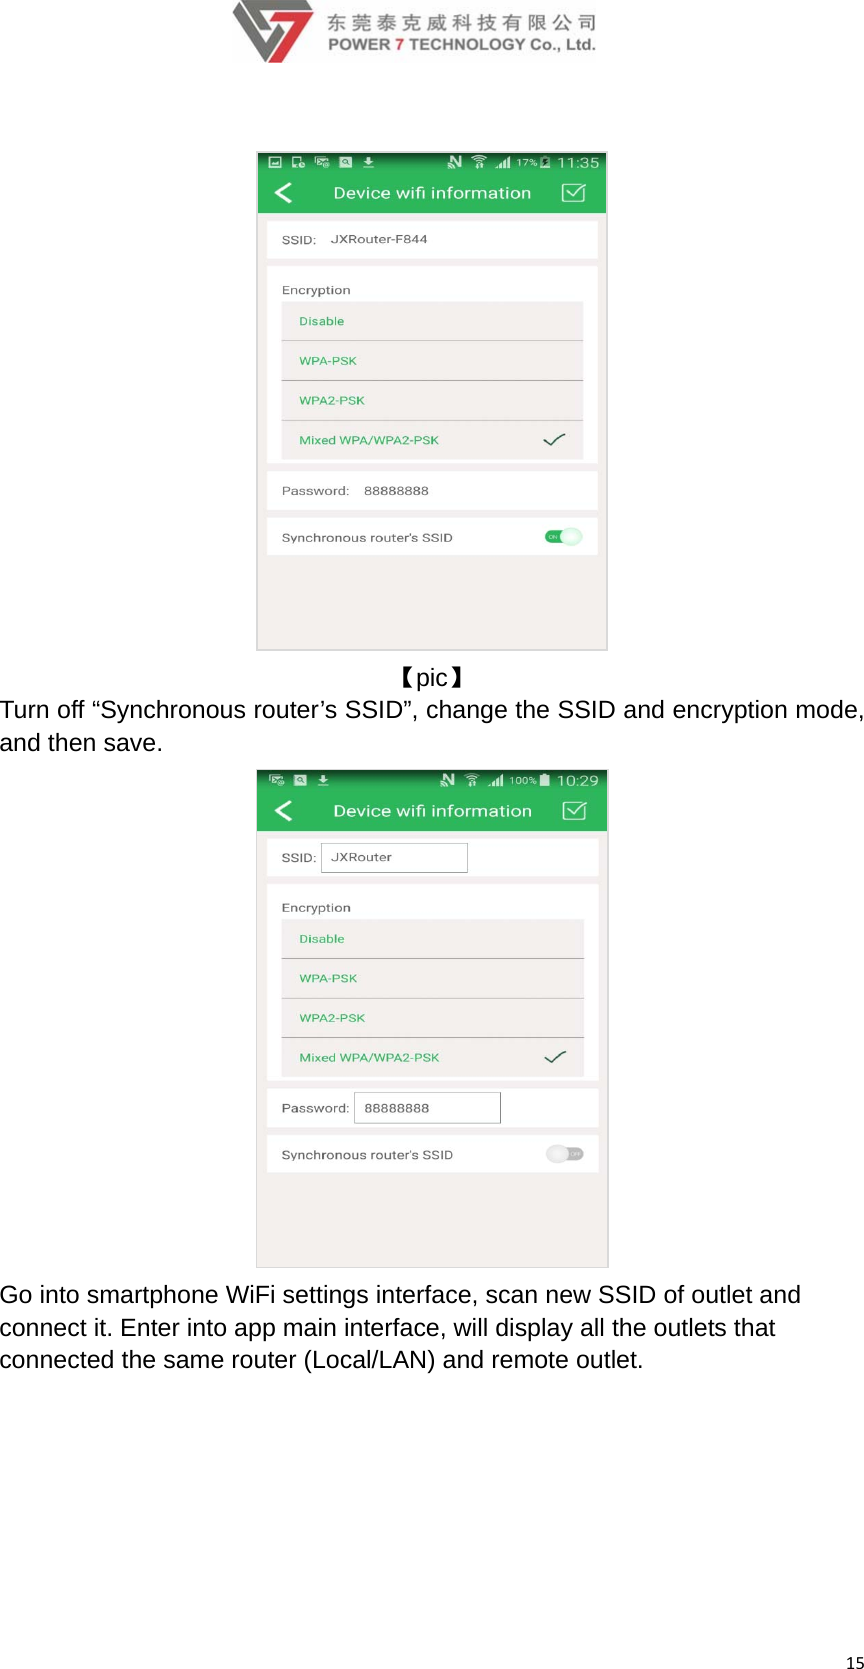 15 【pic】 Turn off “Synchronous router’s SSID”, change the SSID and encryption mode, and then save.  Go into smartphone WiFi settings interface, scan new SSID of outlet and connect it. Enter into app main interface, will display all the outlets that connected the same router (Local/LAN) and remote outlet. 